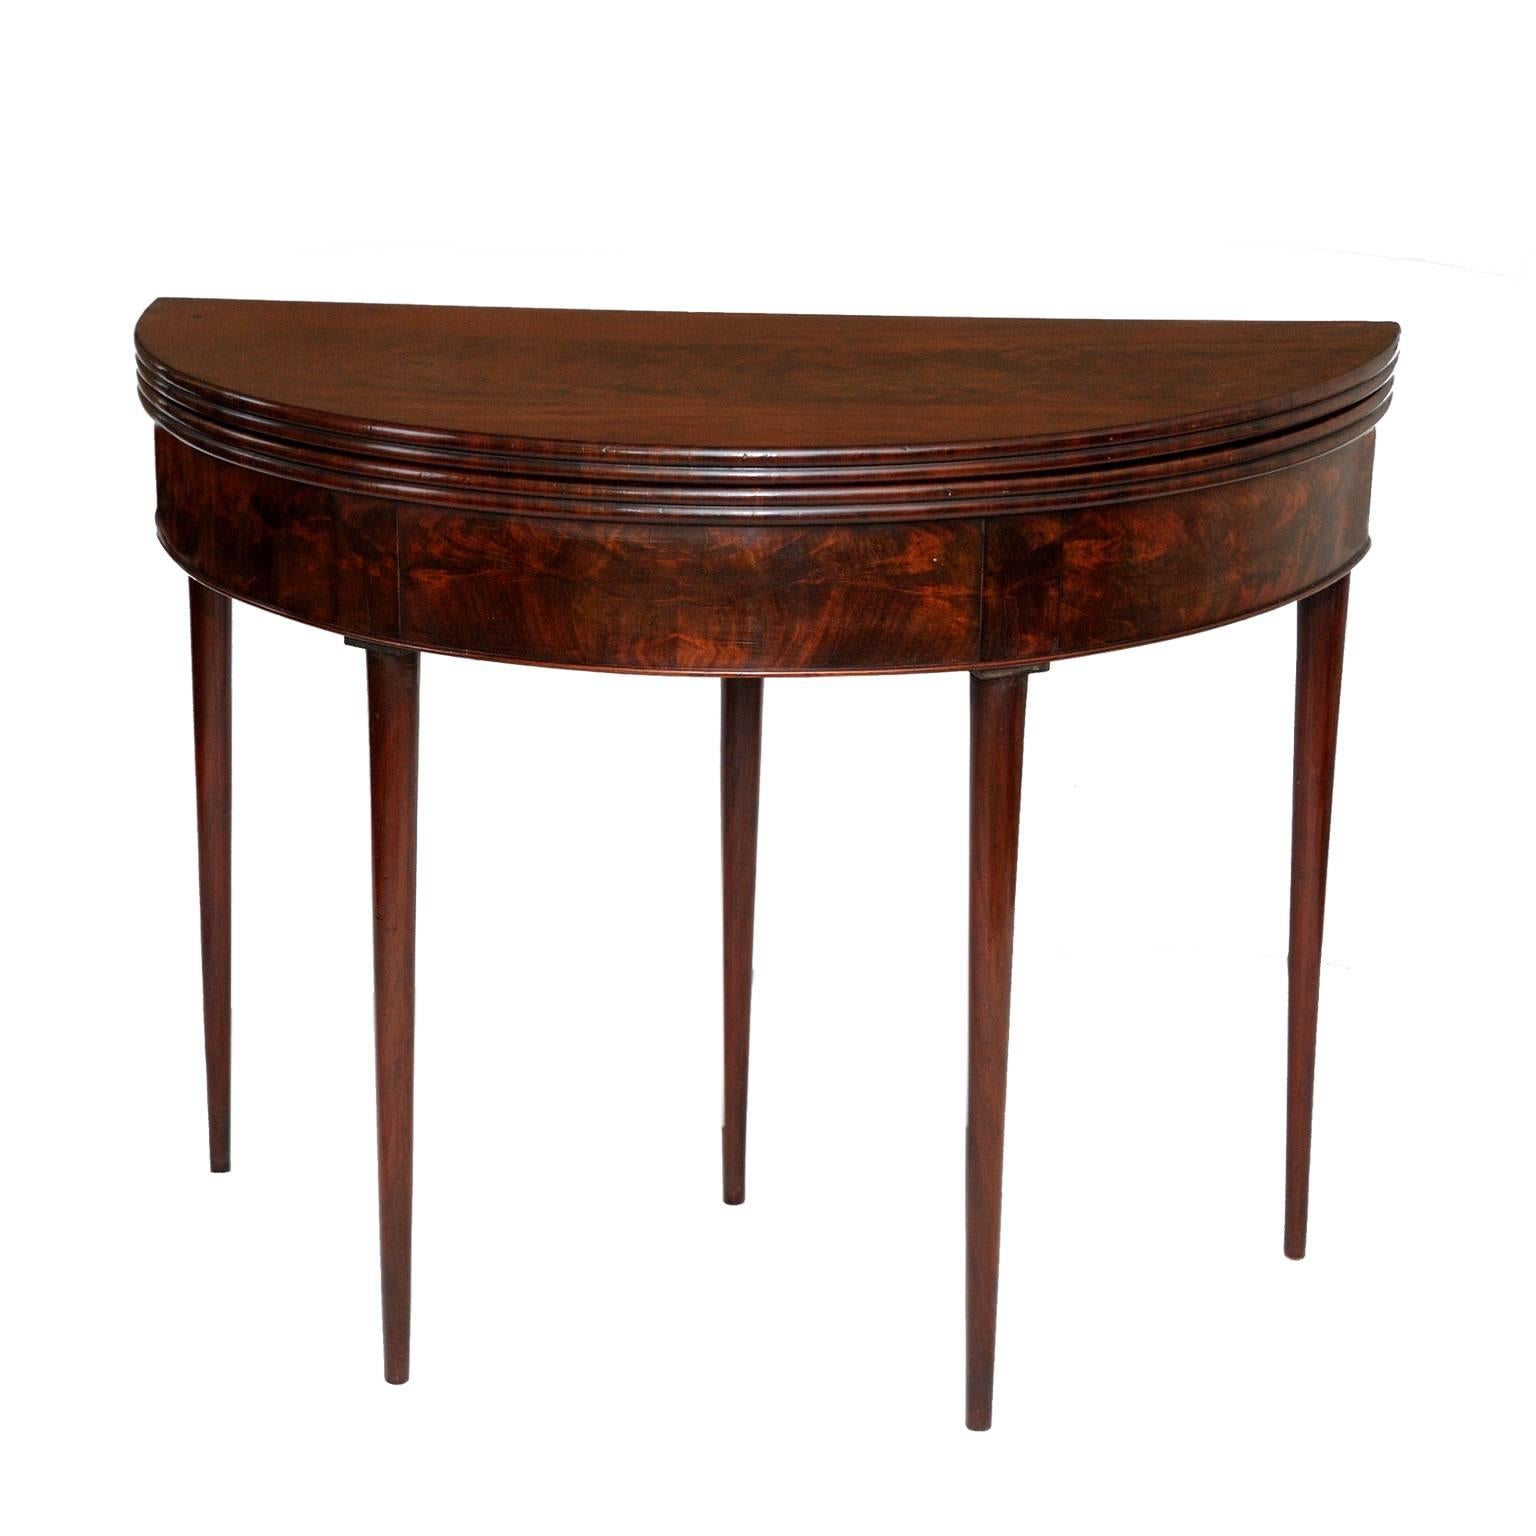 This is a beautifully proportioned and very attractive French late 18th century Louis XVI flame mahogany circular card table, retaining its original tooled red baize interior with pull-out drawer for cards etc, circa 1780.